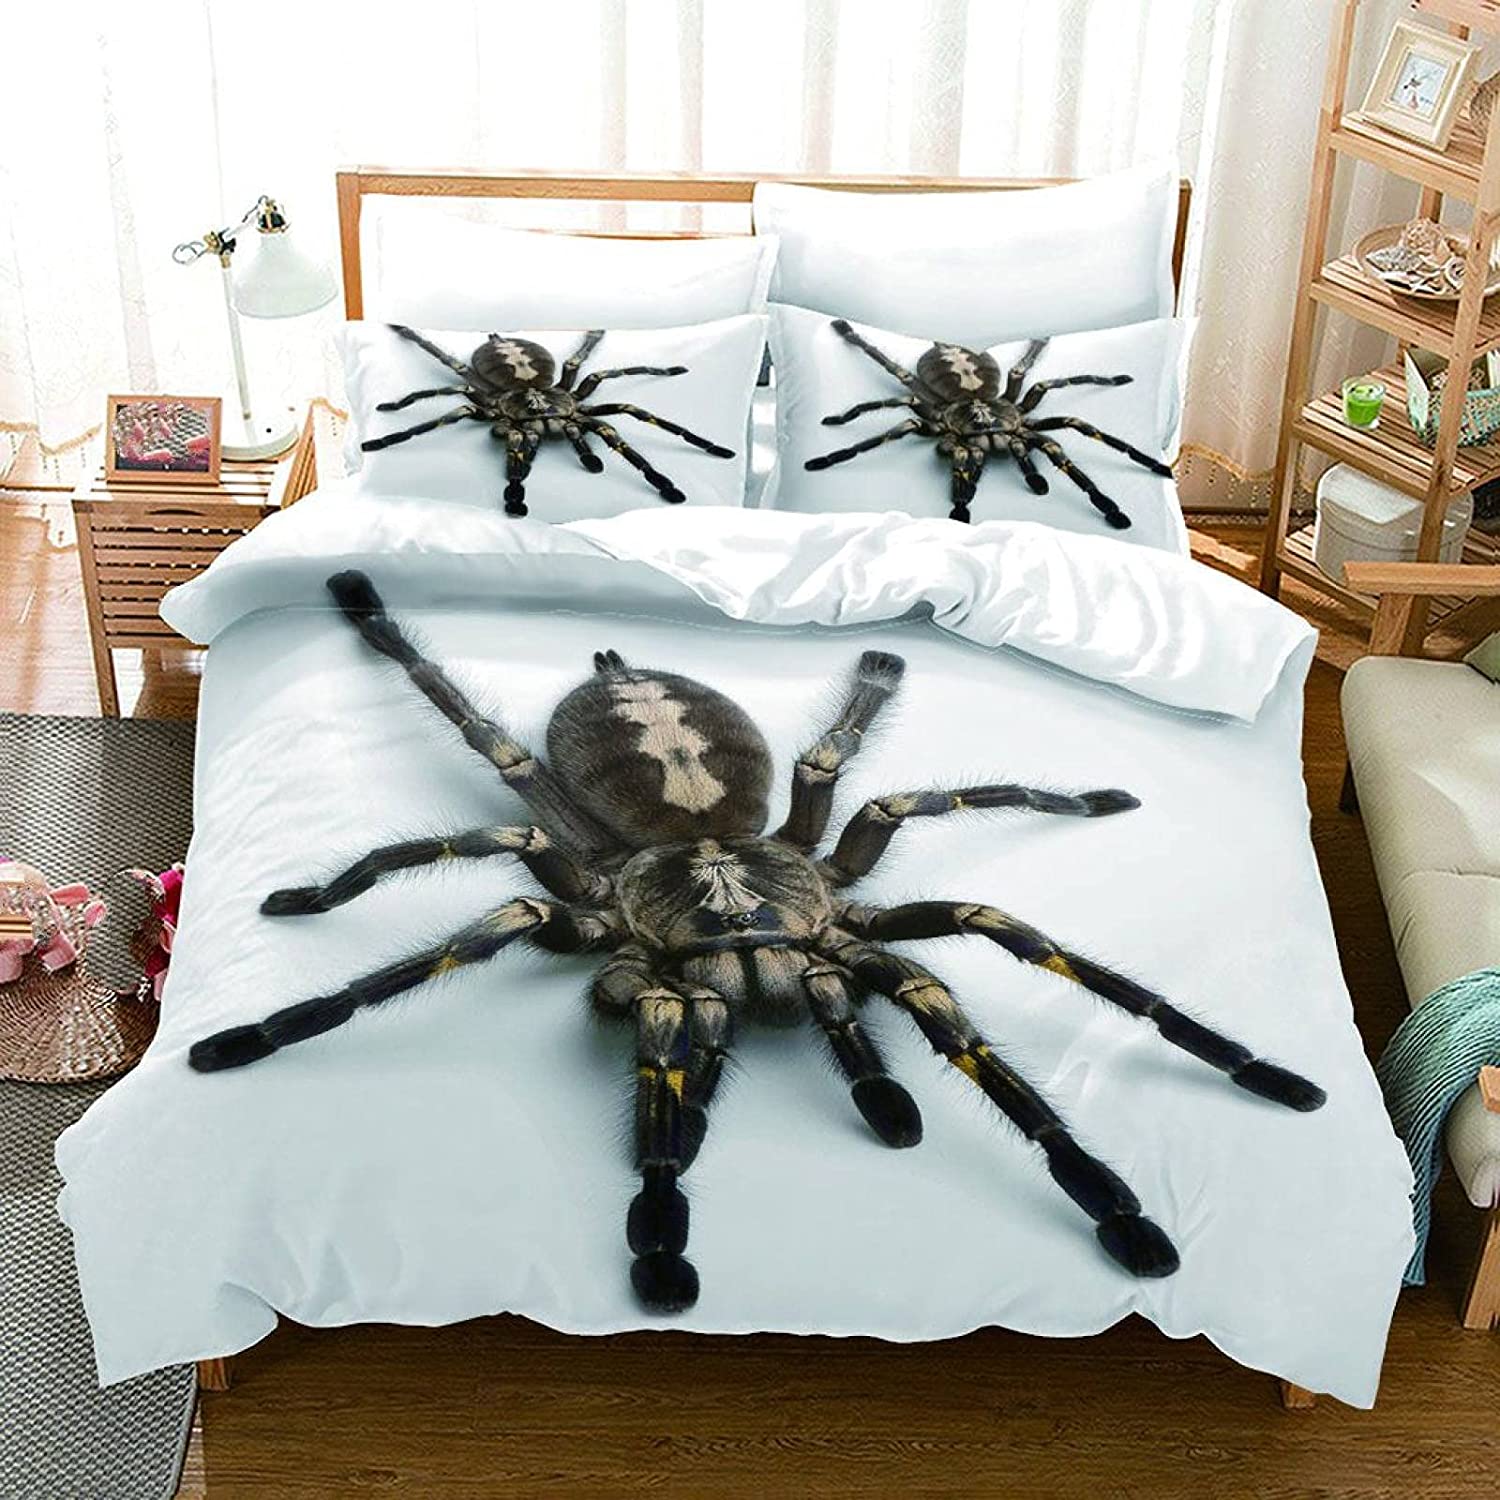 Brown and black colored 3d spider with white bg bedsheet